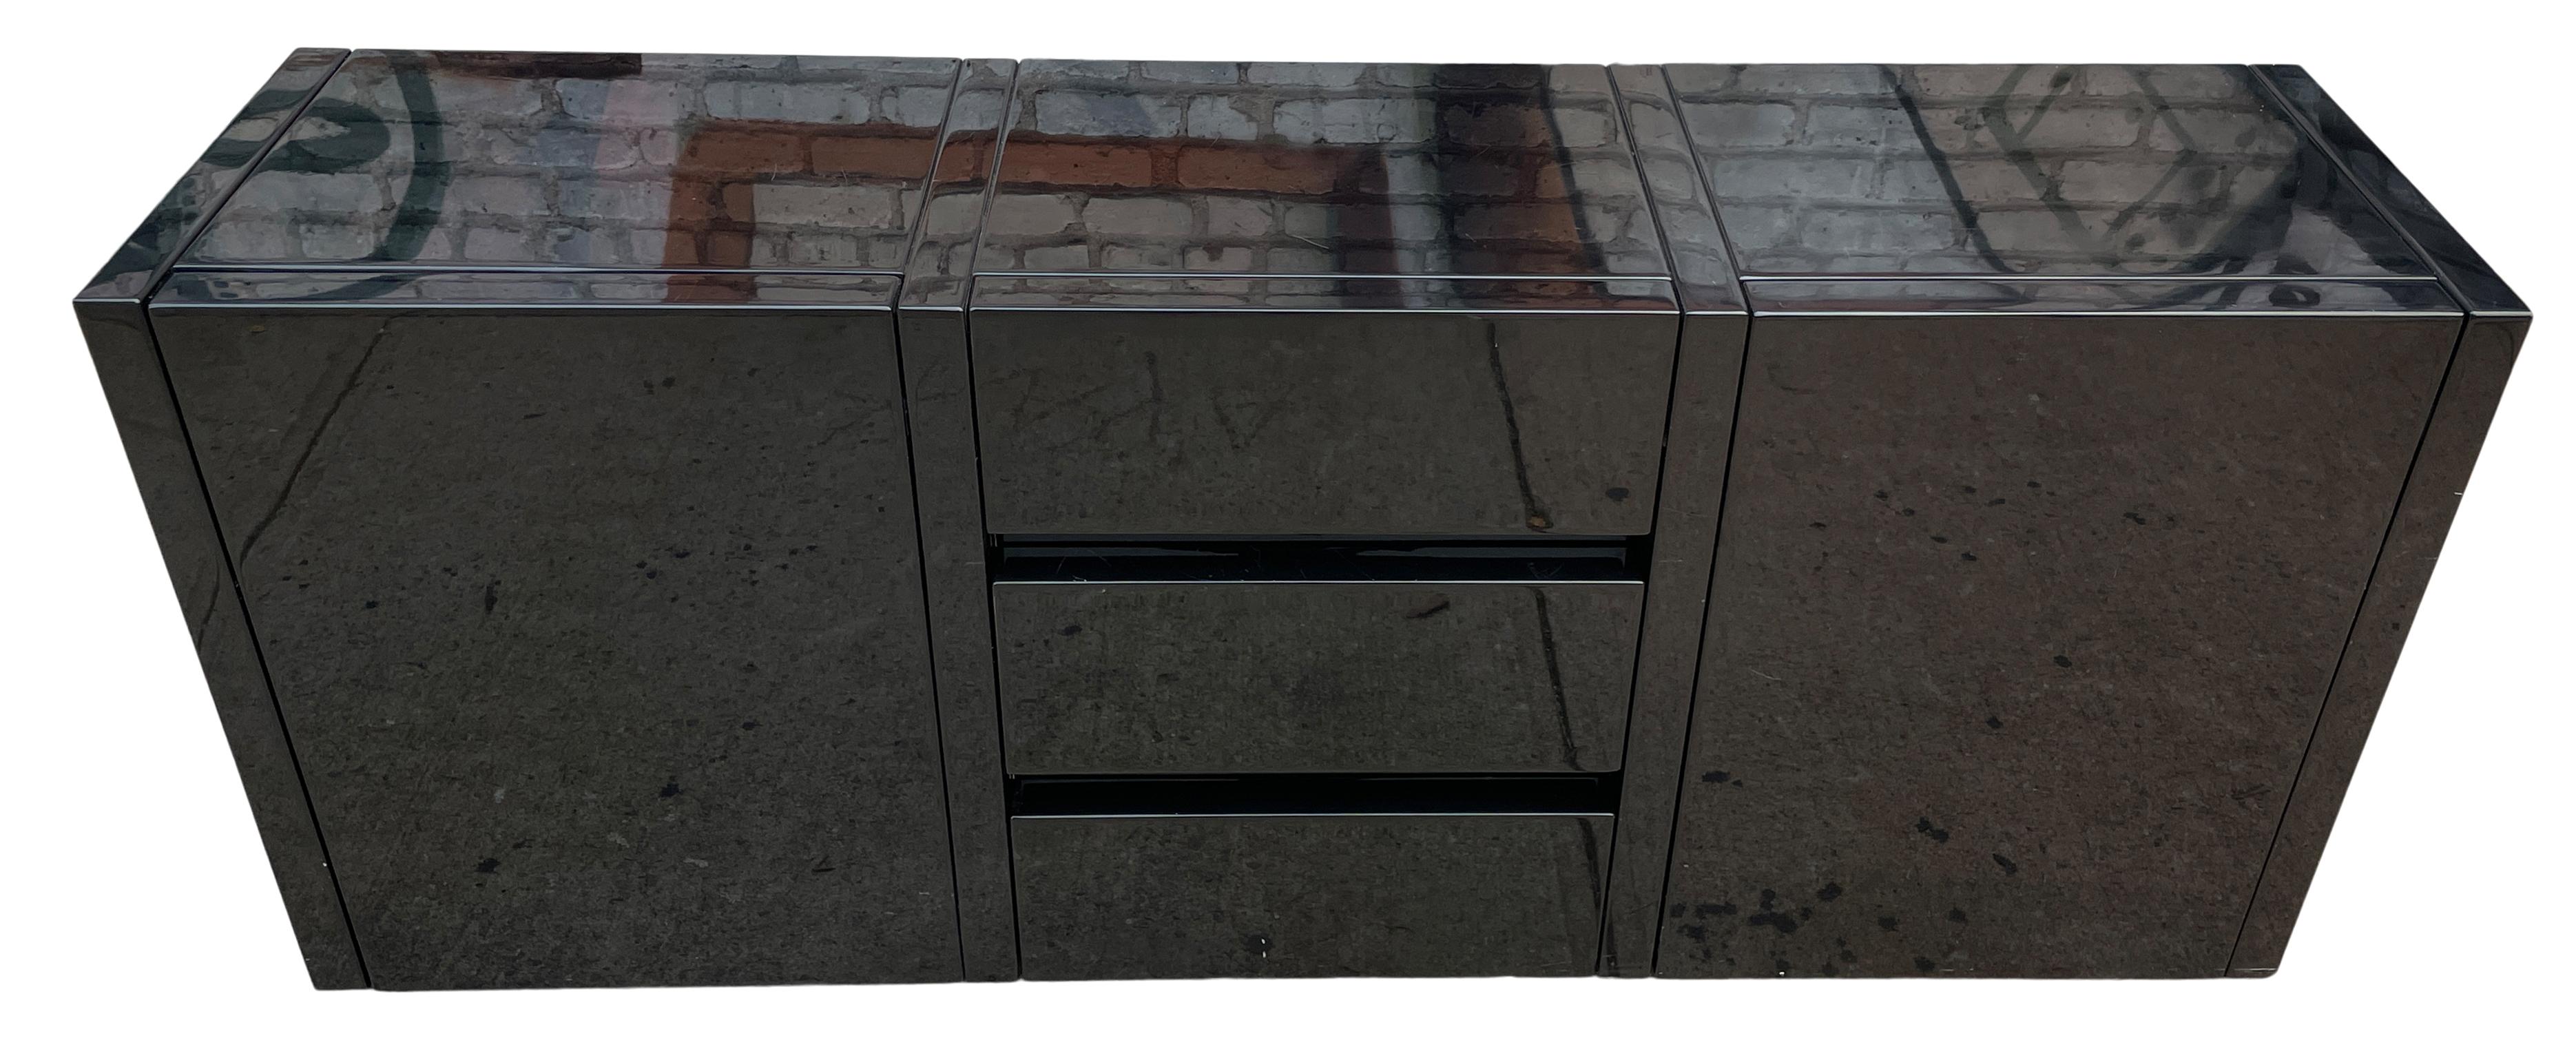 Mid-Century Modern directional black lacquer 3 Drawer 2 cabinet doors credenza sideboard with 2 doors and 3 middle drawers also has 2 Glass adjustable shelves. High gloss Black Lacquer shows normal signs of wear use on top surface just minor light